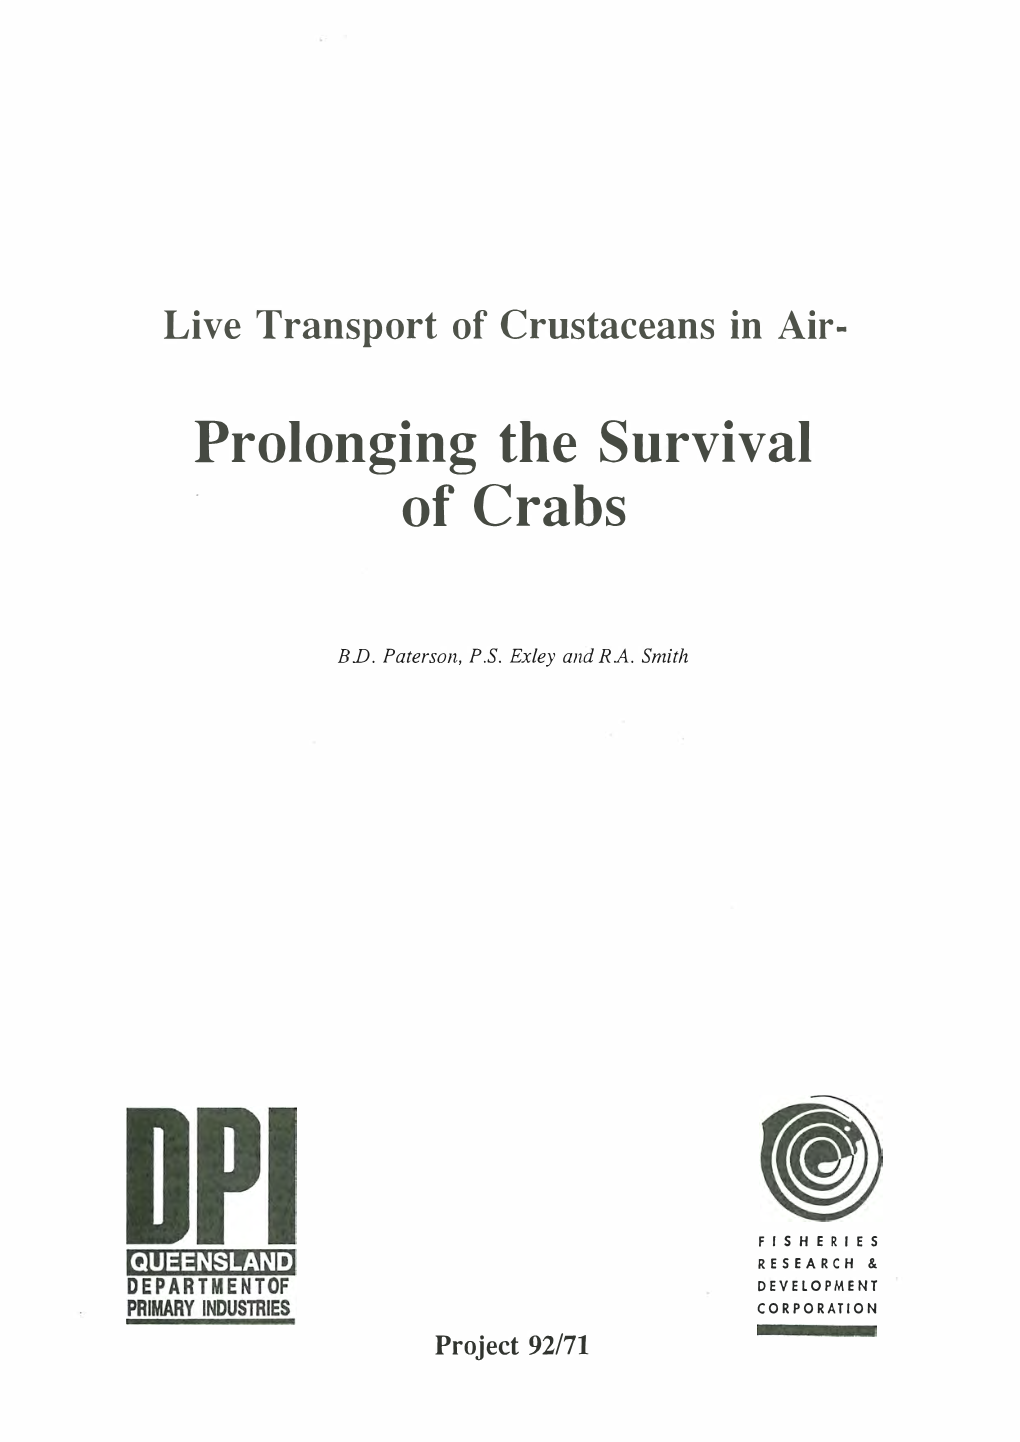 Prolonging the Survival of Crabs